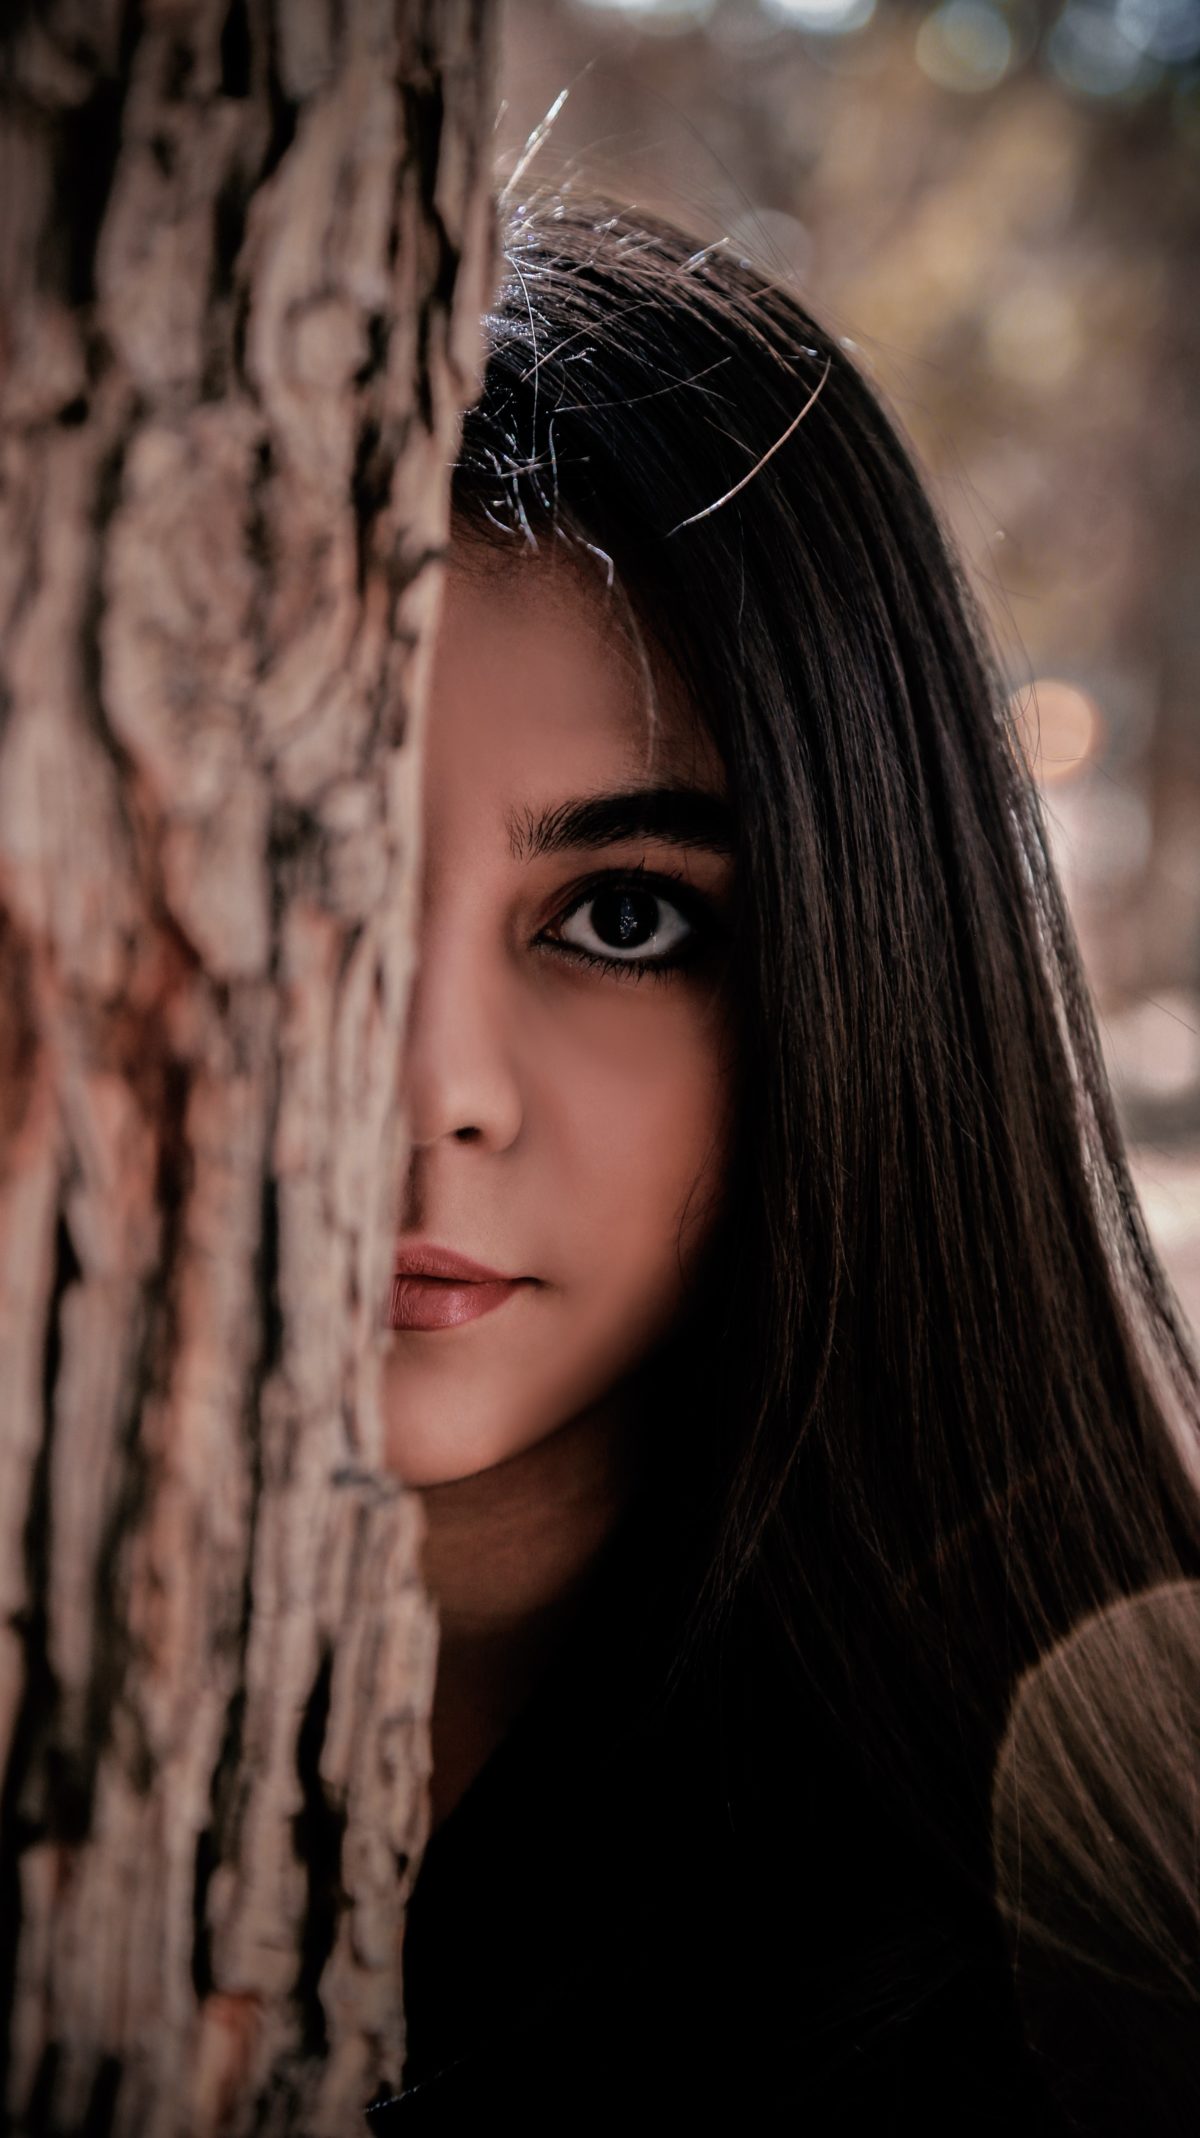 Serious looking young woman whose face is partially obscured by a tree trunk.